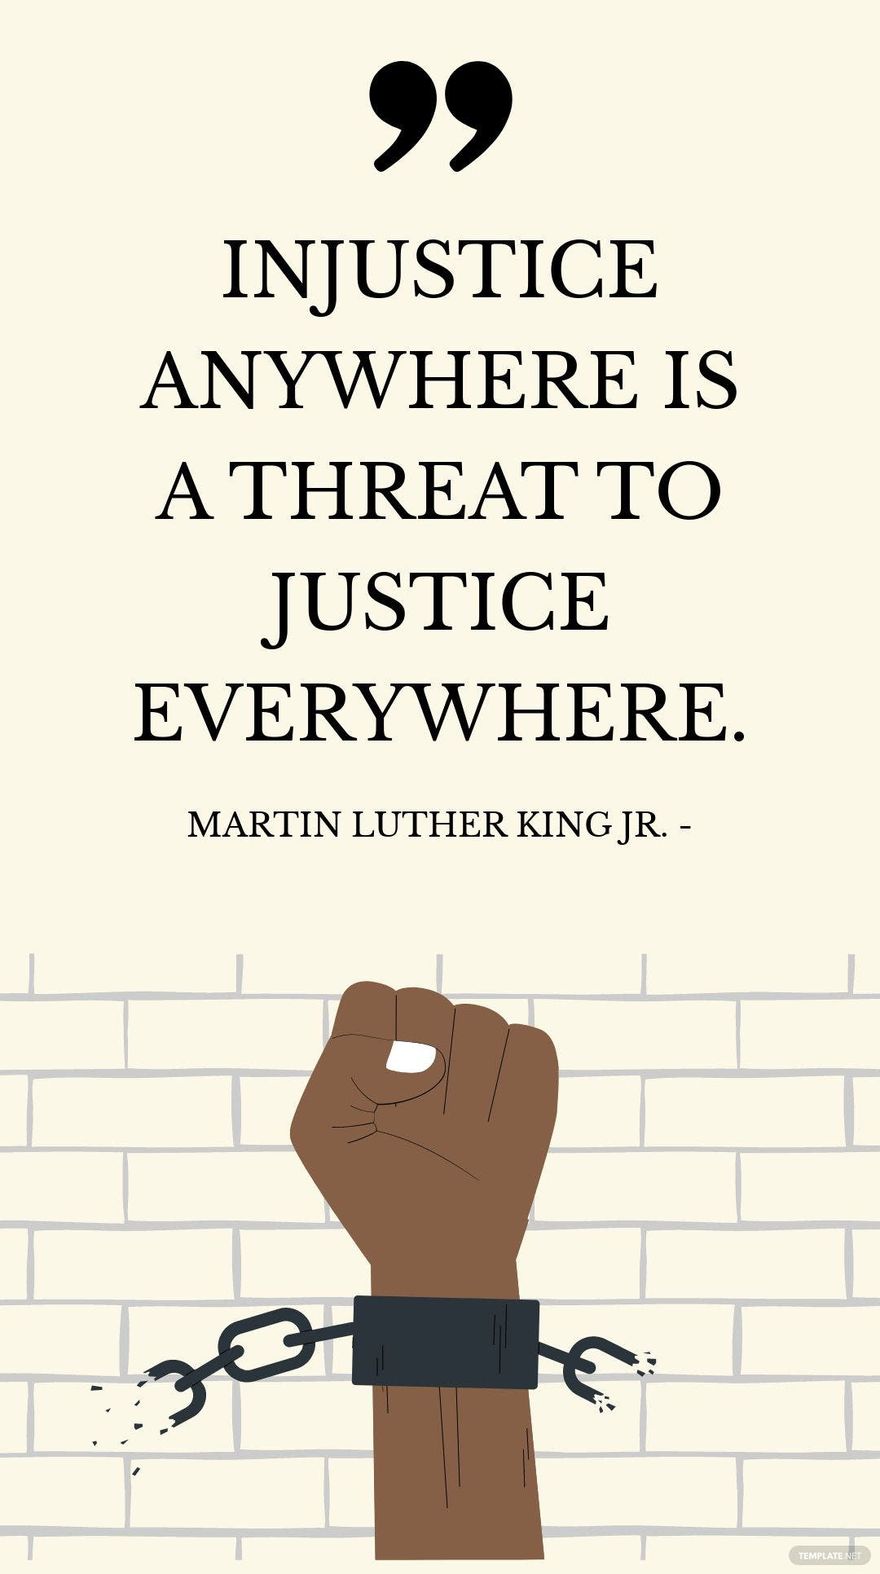 Free Martin Luther King Jr. - Injustice anywhere is a threat to justice everywhere.